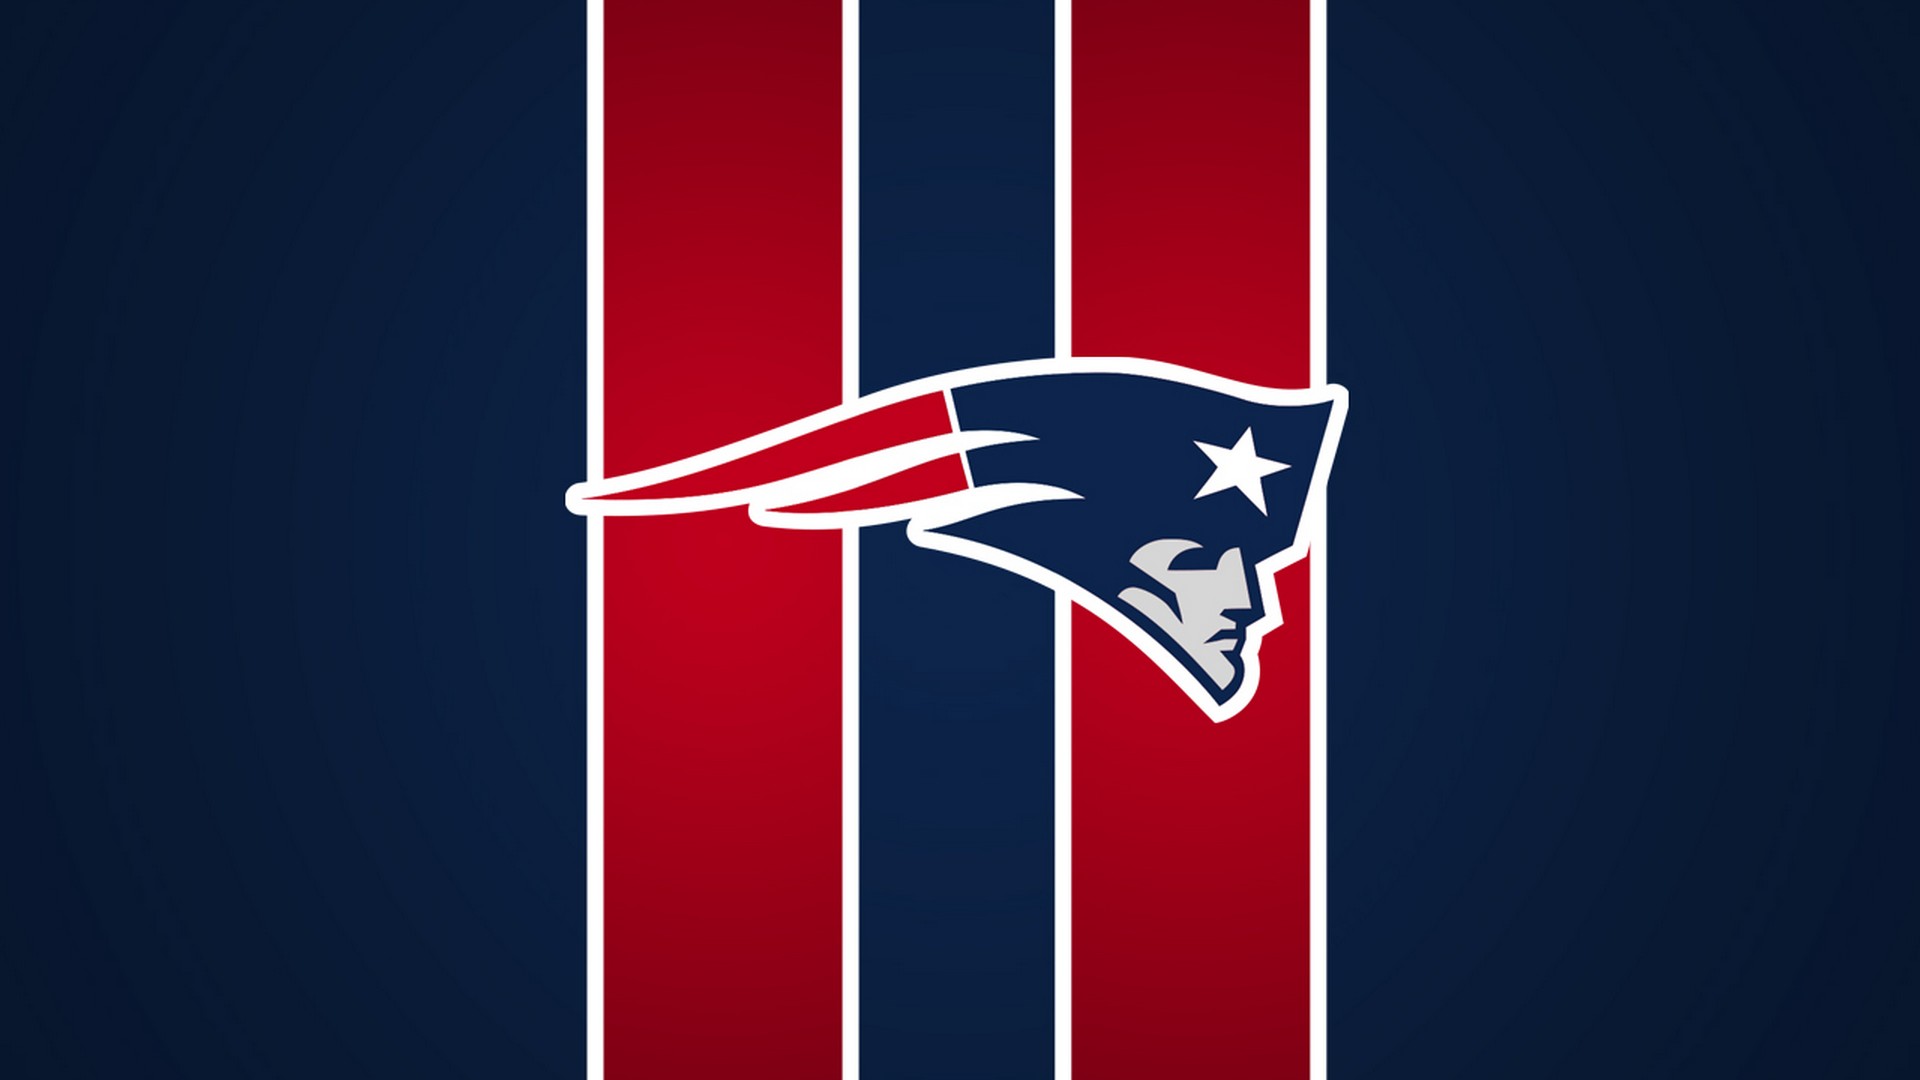 NE Patriots Desktop Wallpapers with resolution 1920x1080 pixel. You can make this wallpaper for your Mac or Windows Desktop Background, iPhone, Android or Tablet and another Smartphone device